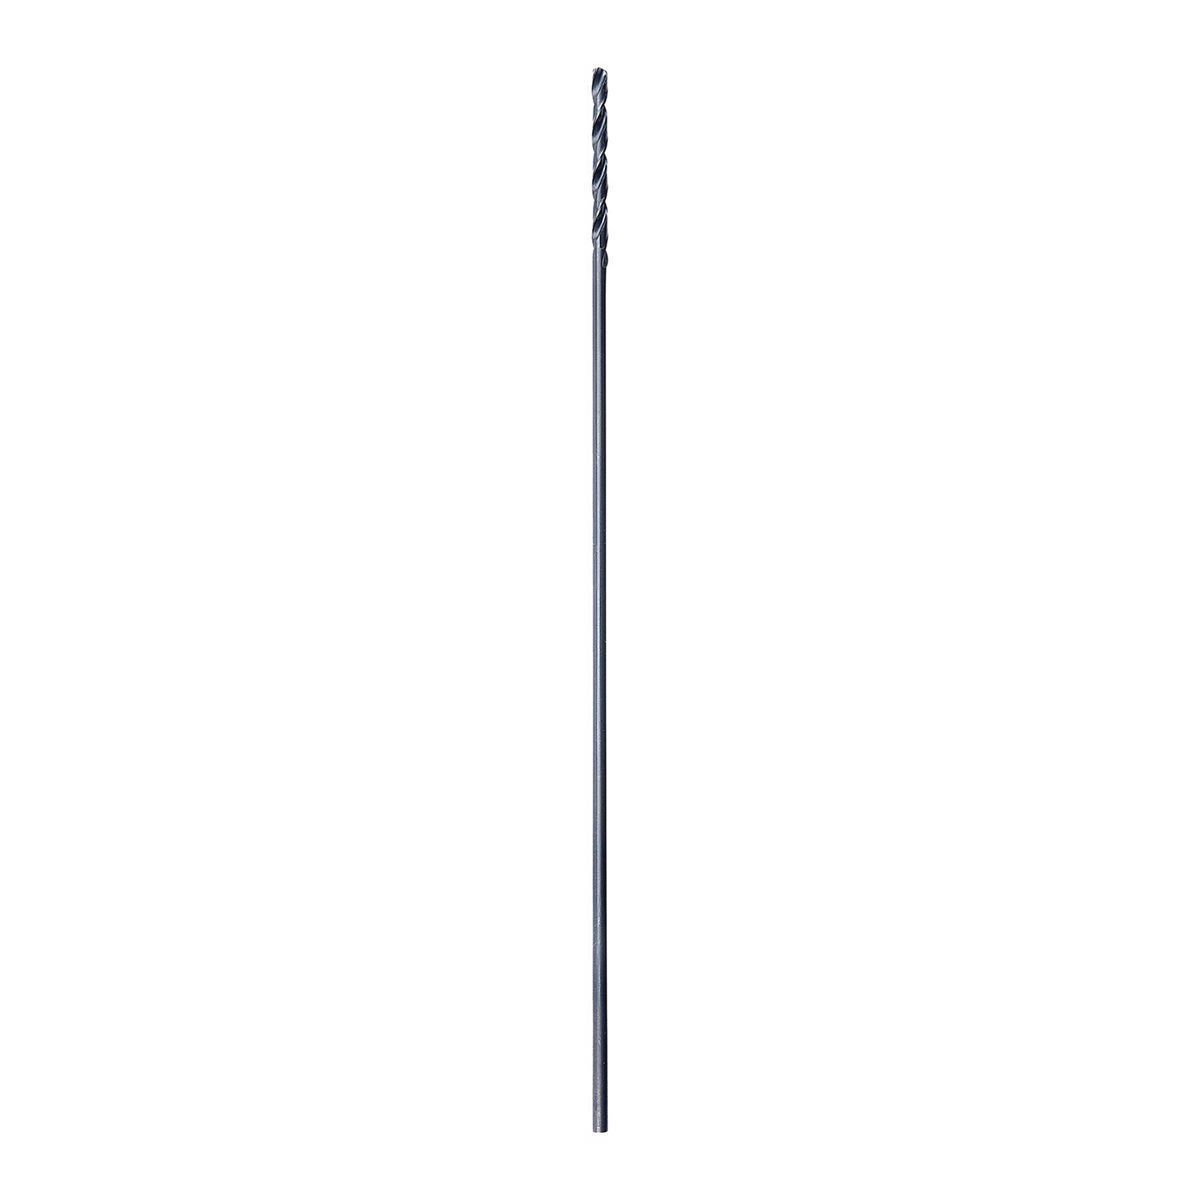 HERCULES 3/16 in. x 12 in. Black Oxide Extended Length Drill Bit